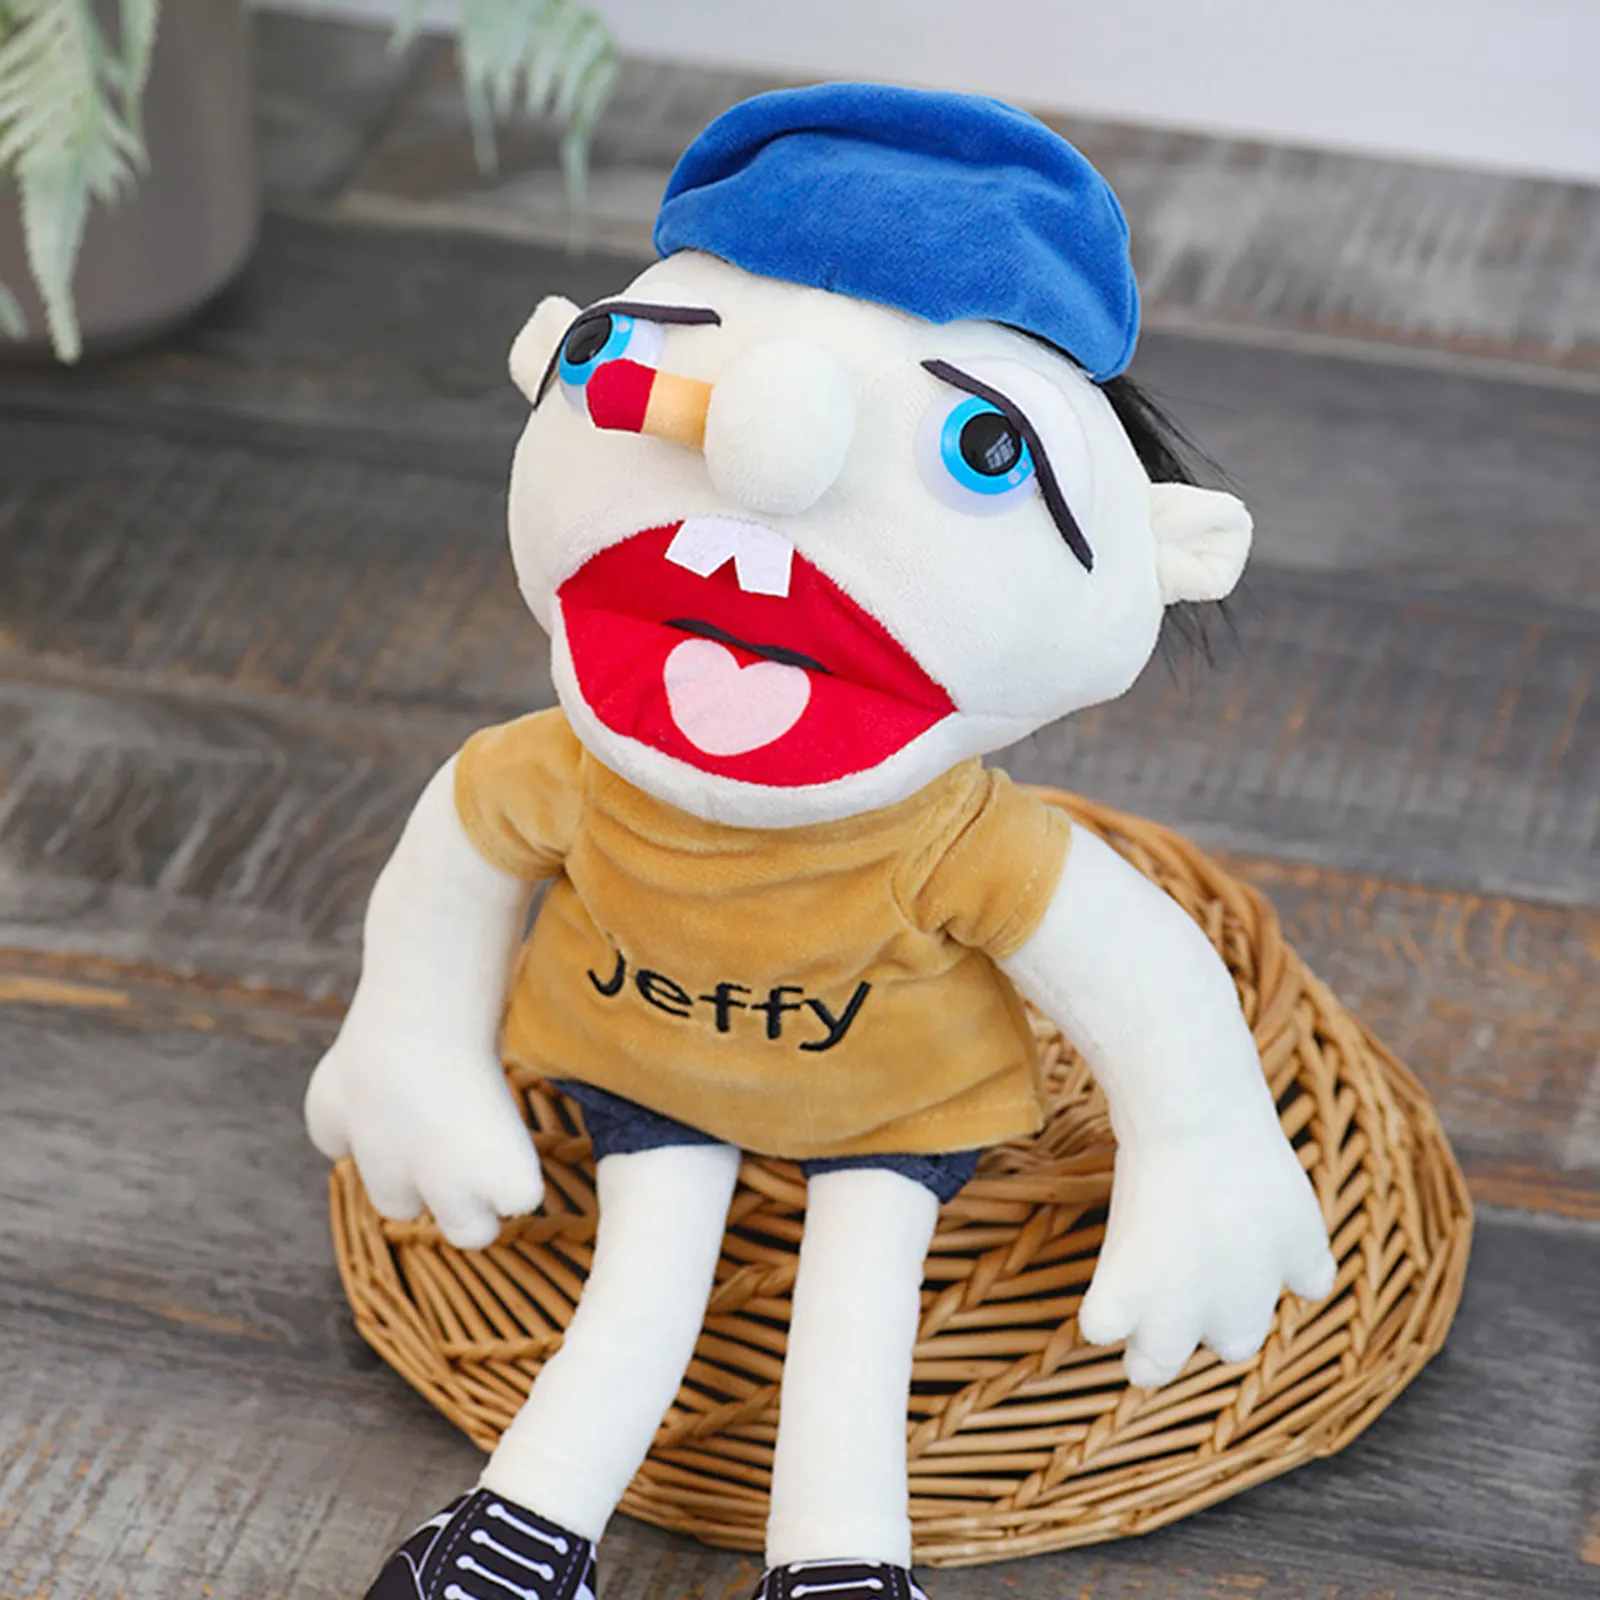 Cartoon Jeffy Tuxedo Sam Plush Backpack Toy 38cm Soft Stuffed Peluches Doll  For Kids Perfect Christmas Or Birthday Gift For Boys And Girls Drop 230111  From Deng08, $20.83